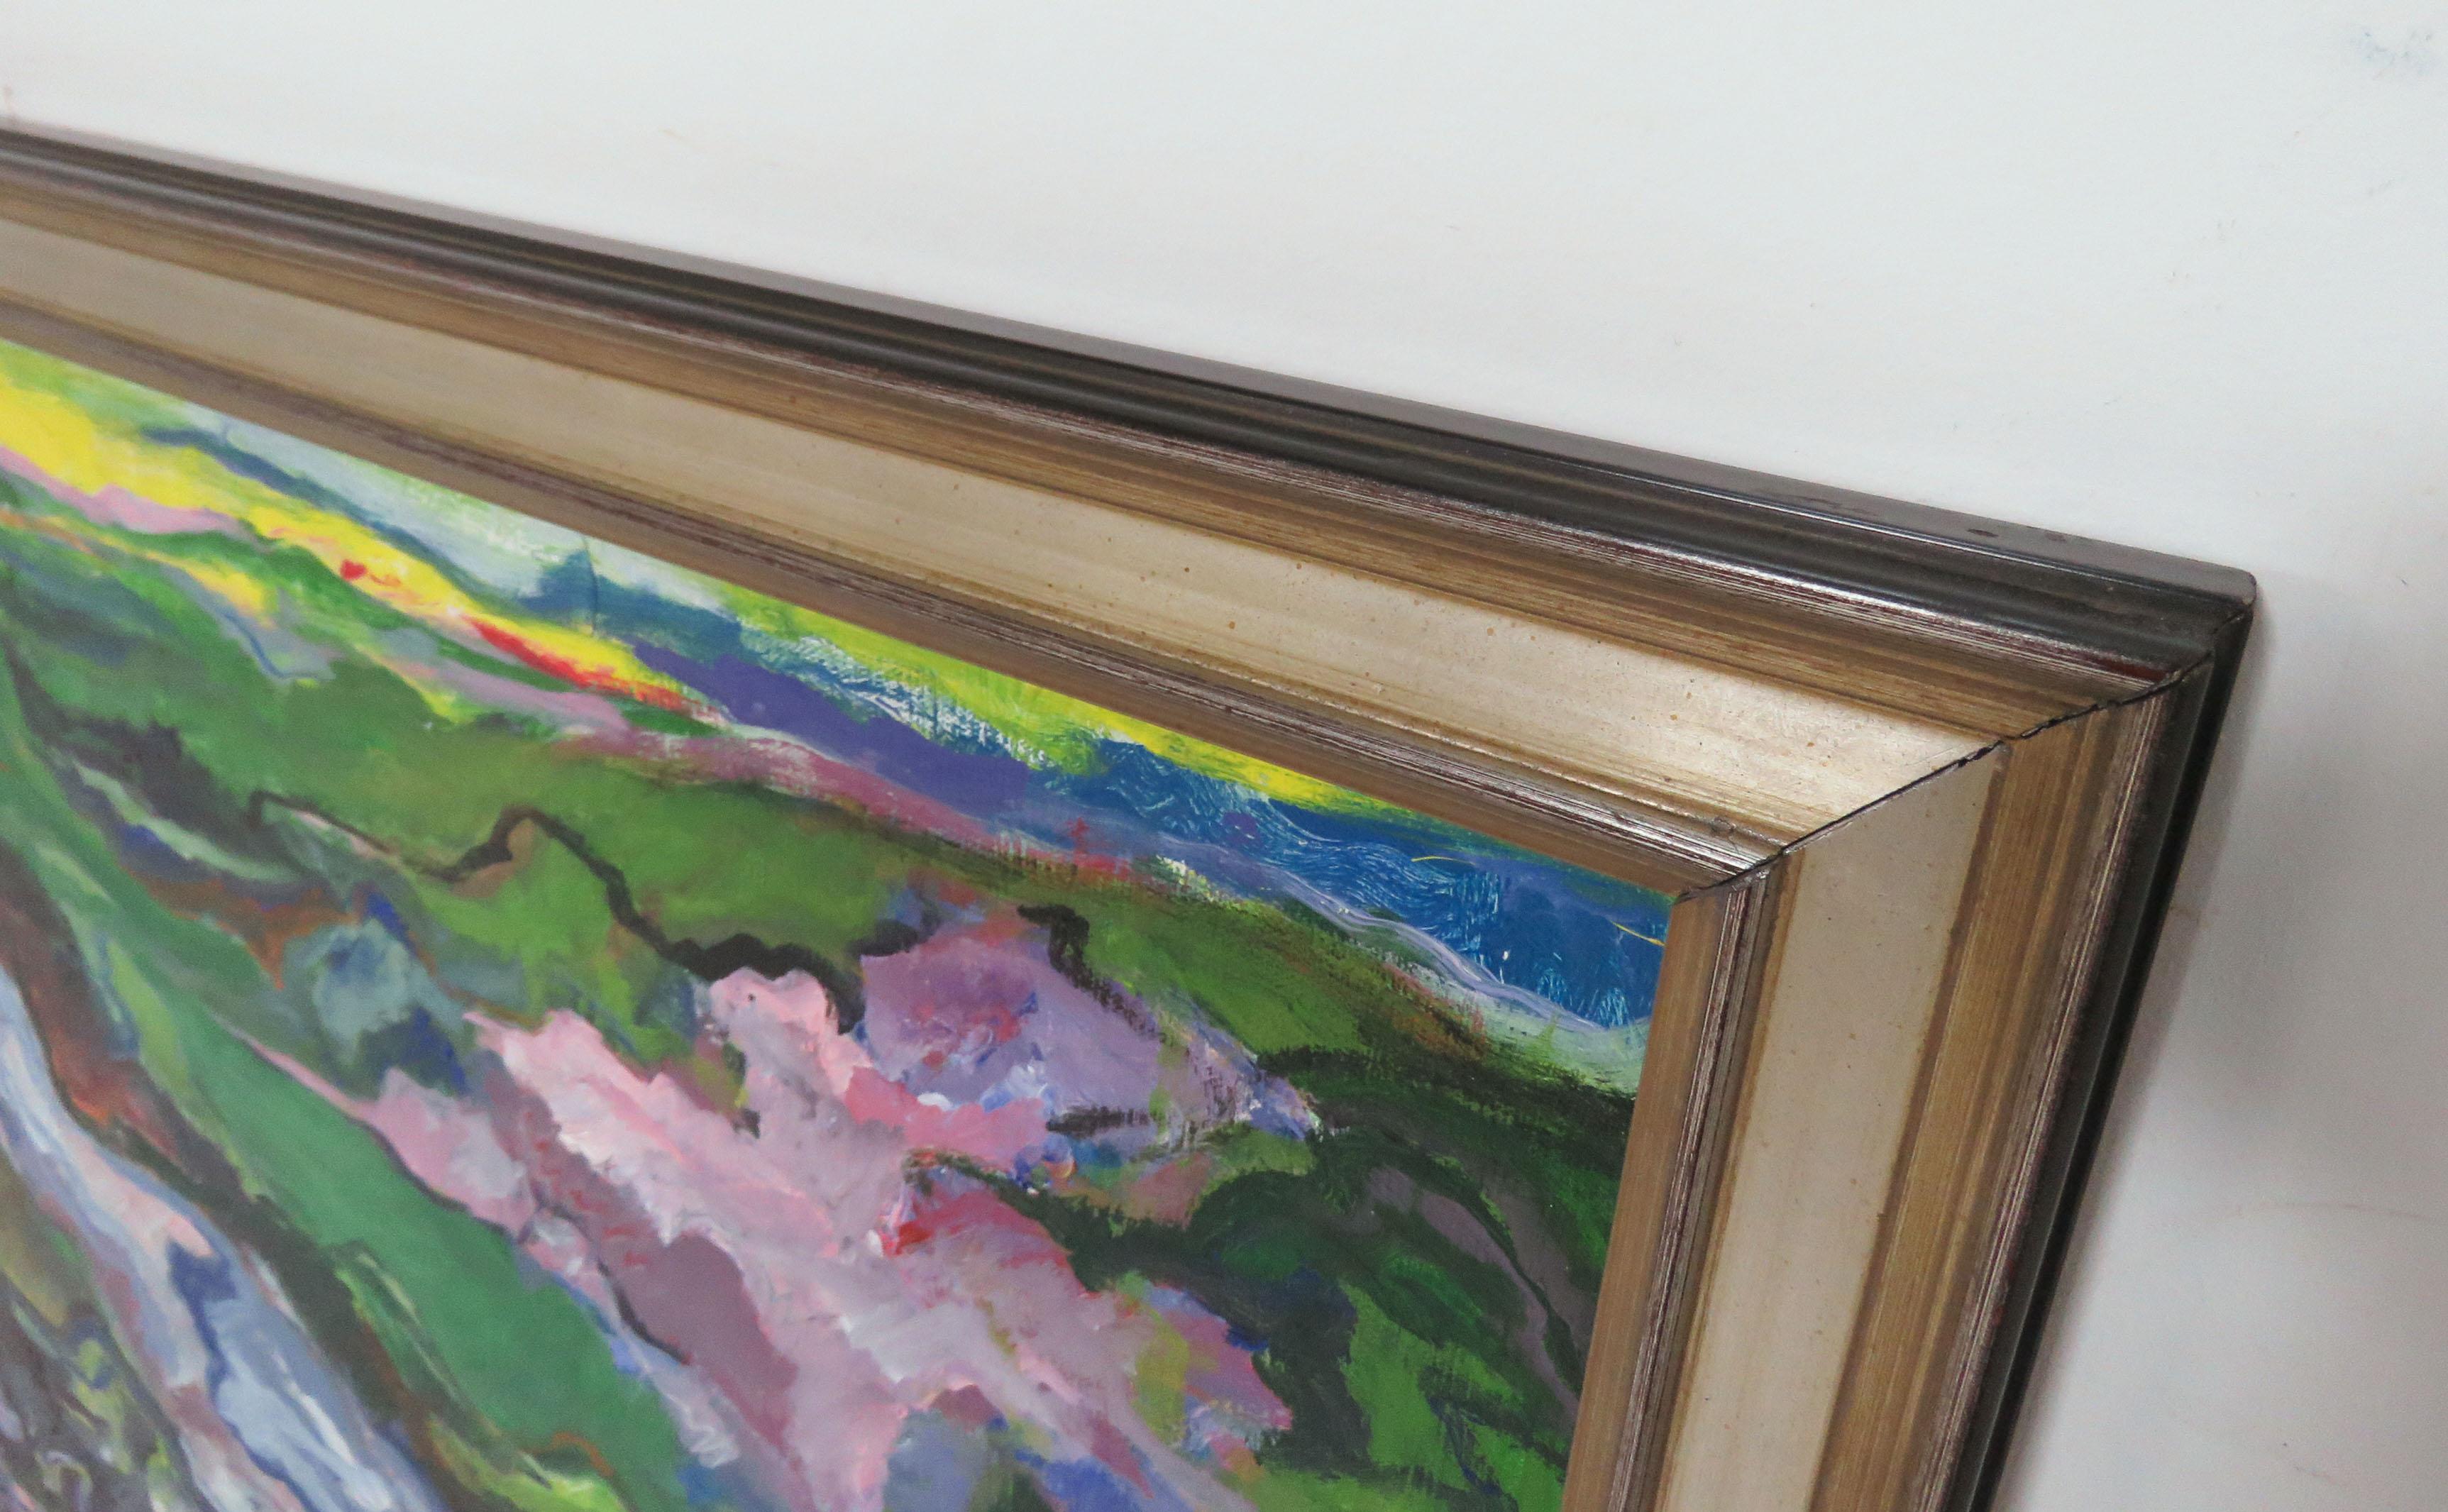 Paint Modernist Abstract Landscape in the Fauvist Style, Signed and Dated 1974